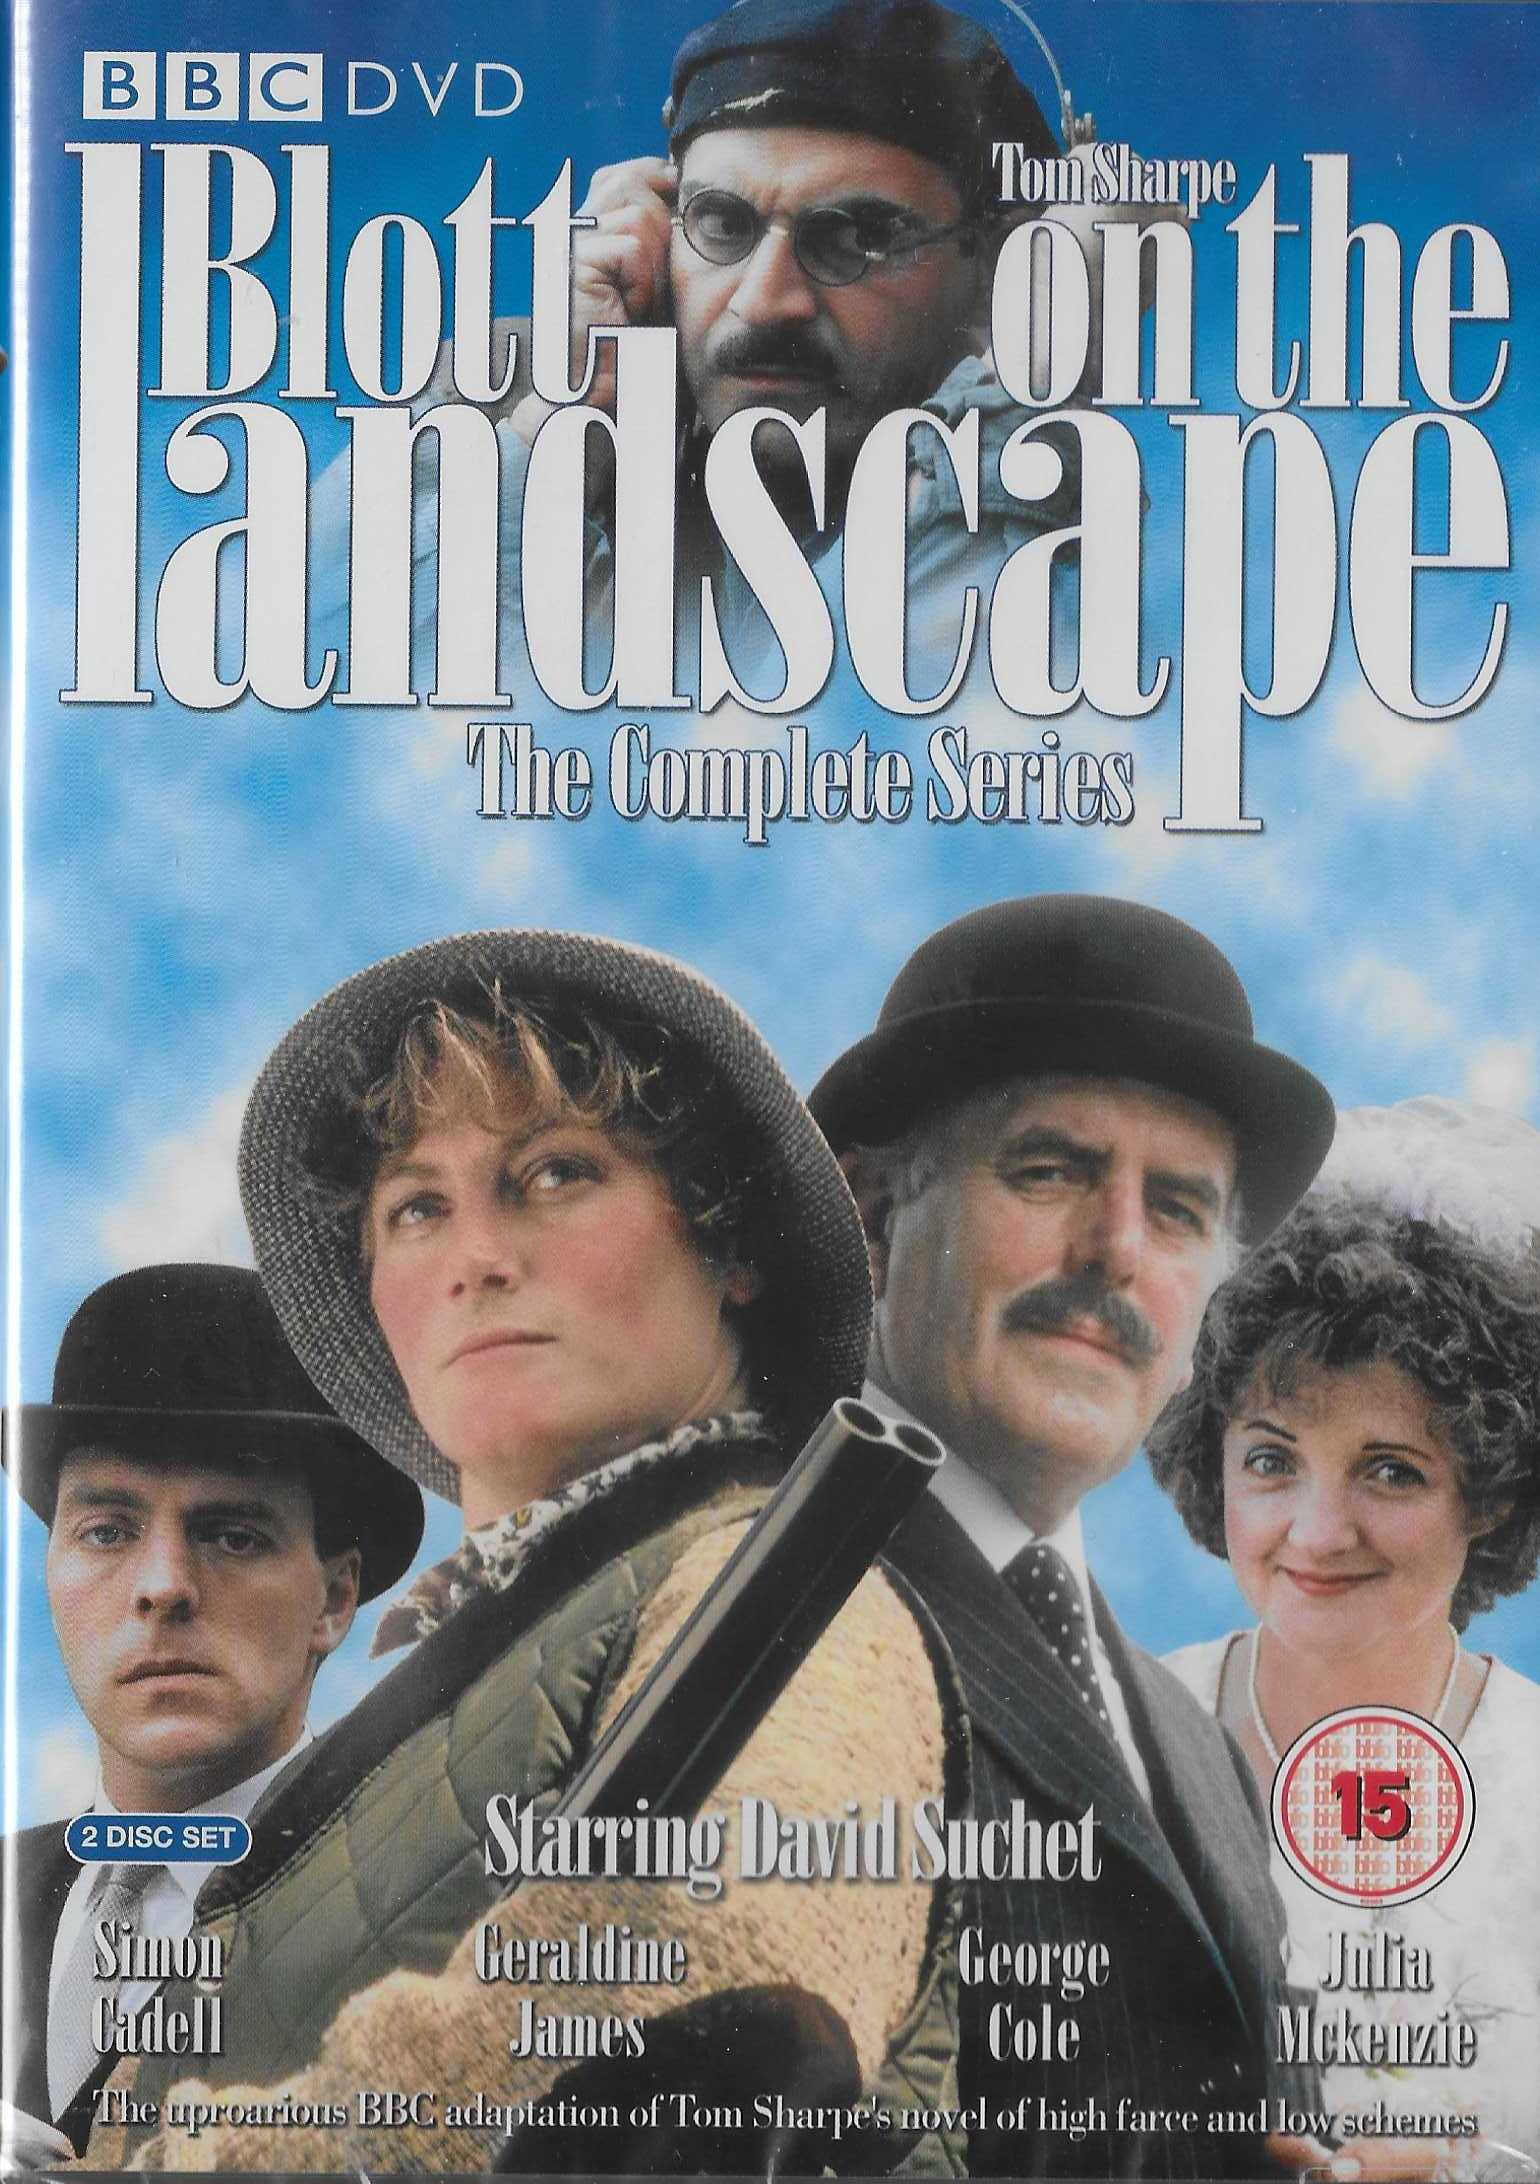 Picture of BBCDVD 1678 Blott on the landscape by artist Malcolm Bradbury from the BBC dvds - Records and Tapes library